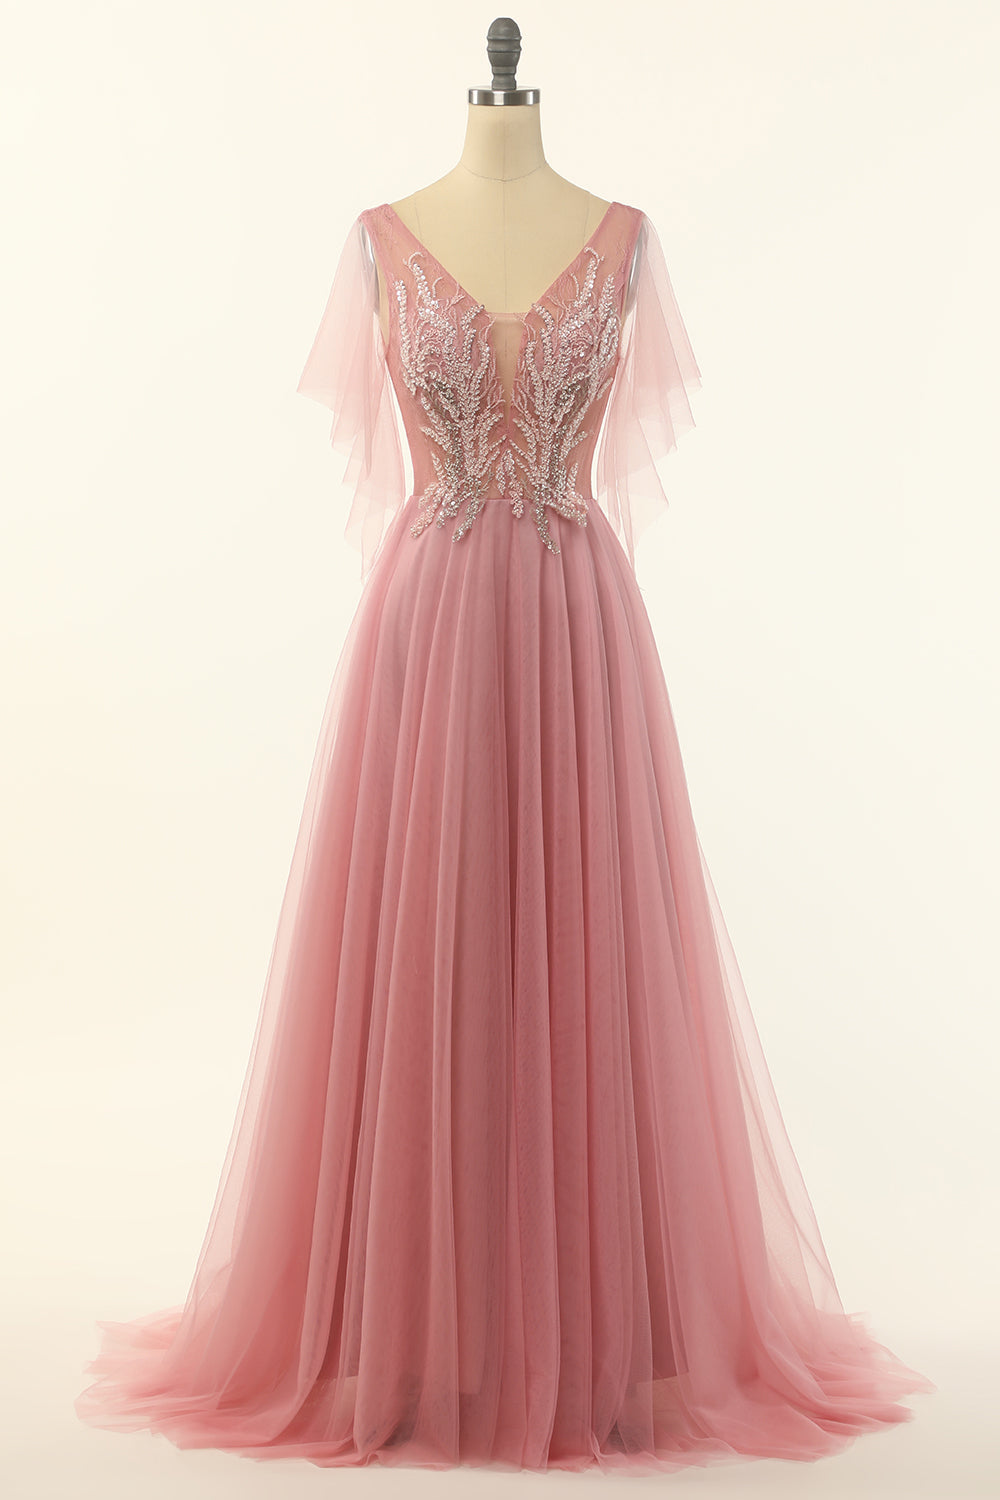 Blush Appliqued A-line Tulle Ball Dress